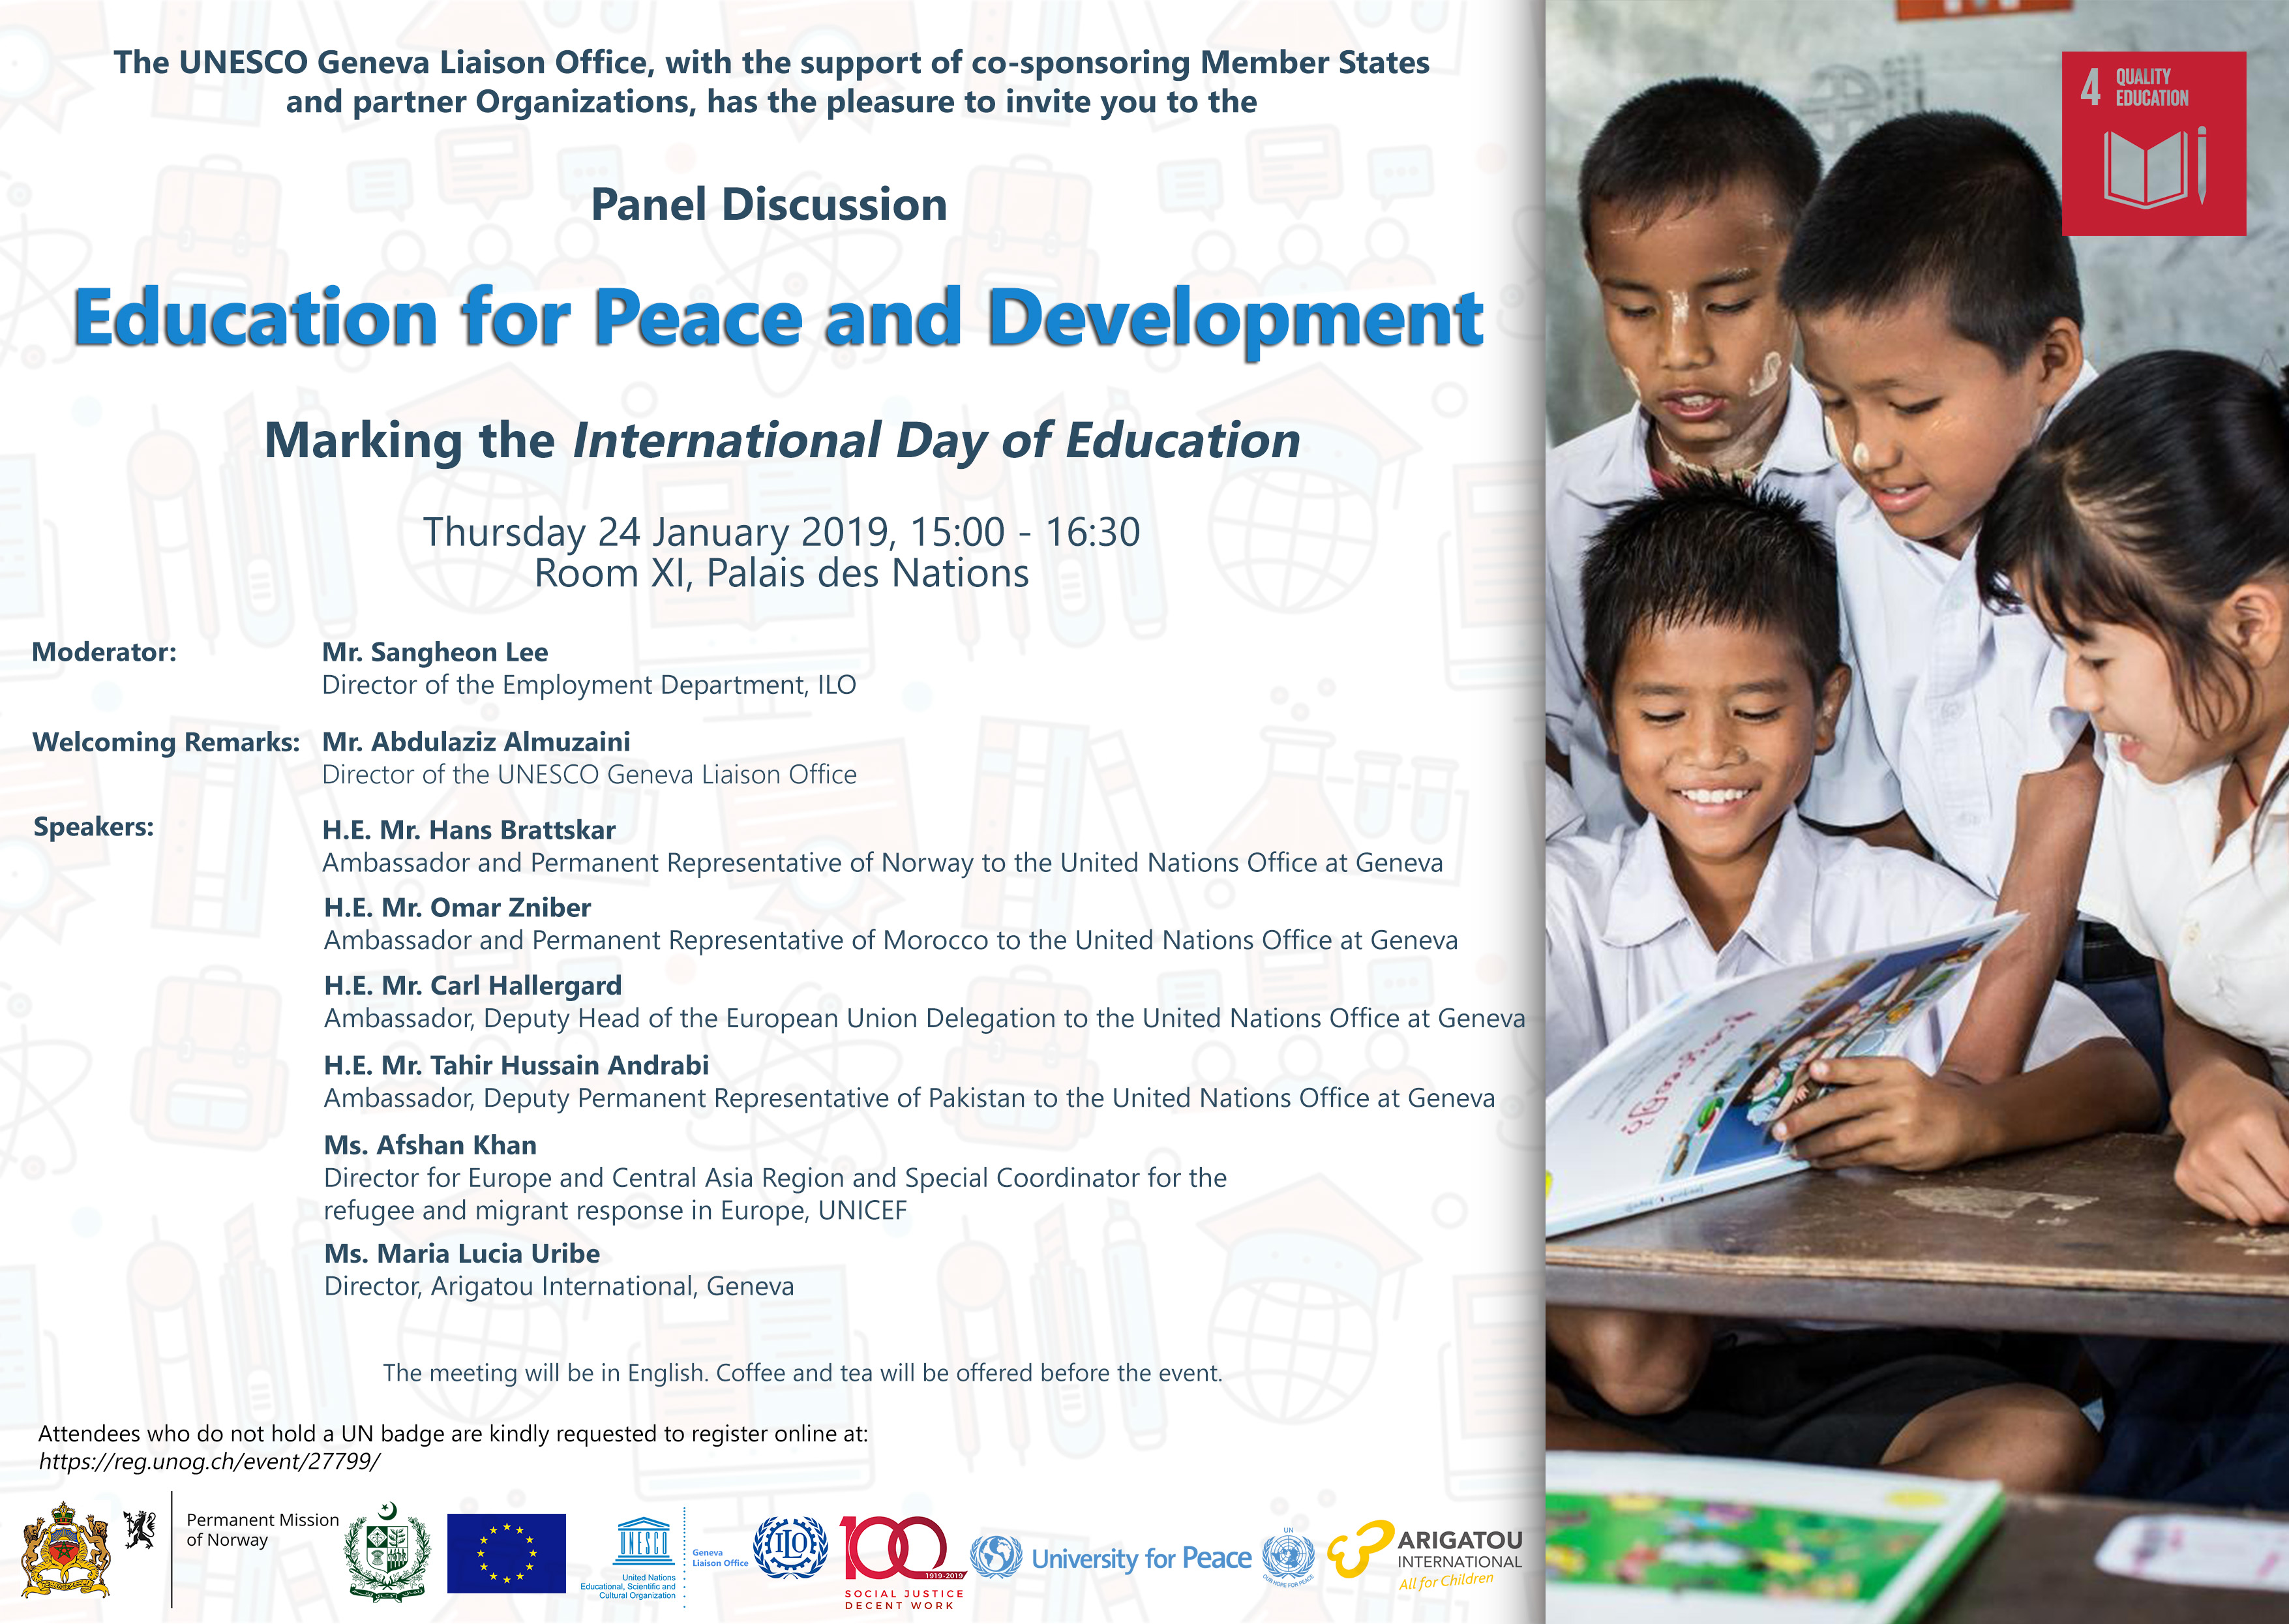 Education for Peace and Development - a panel discussion to mark the International Day of Education